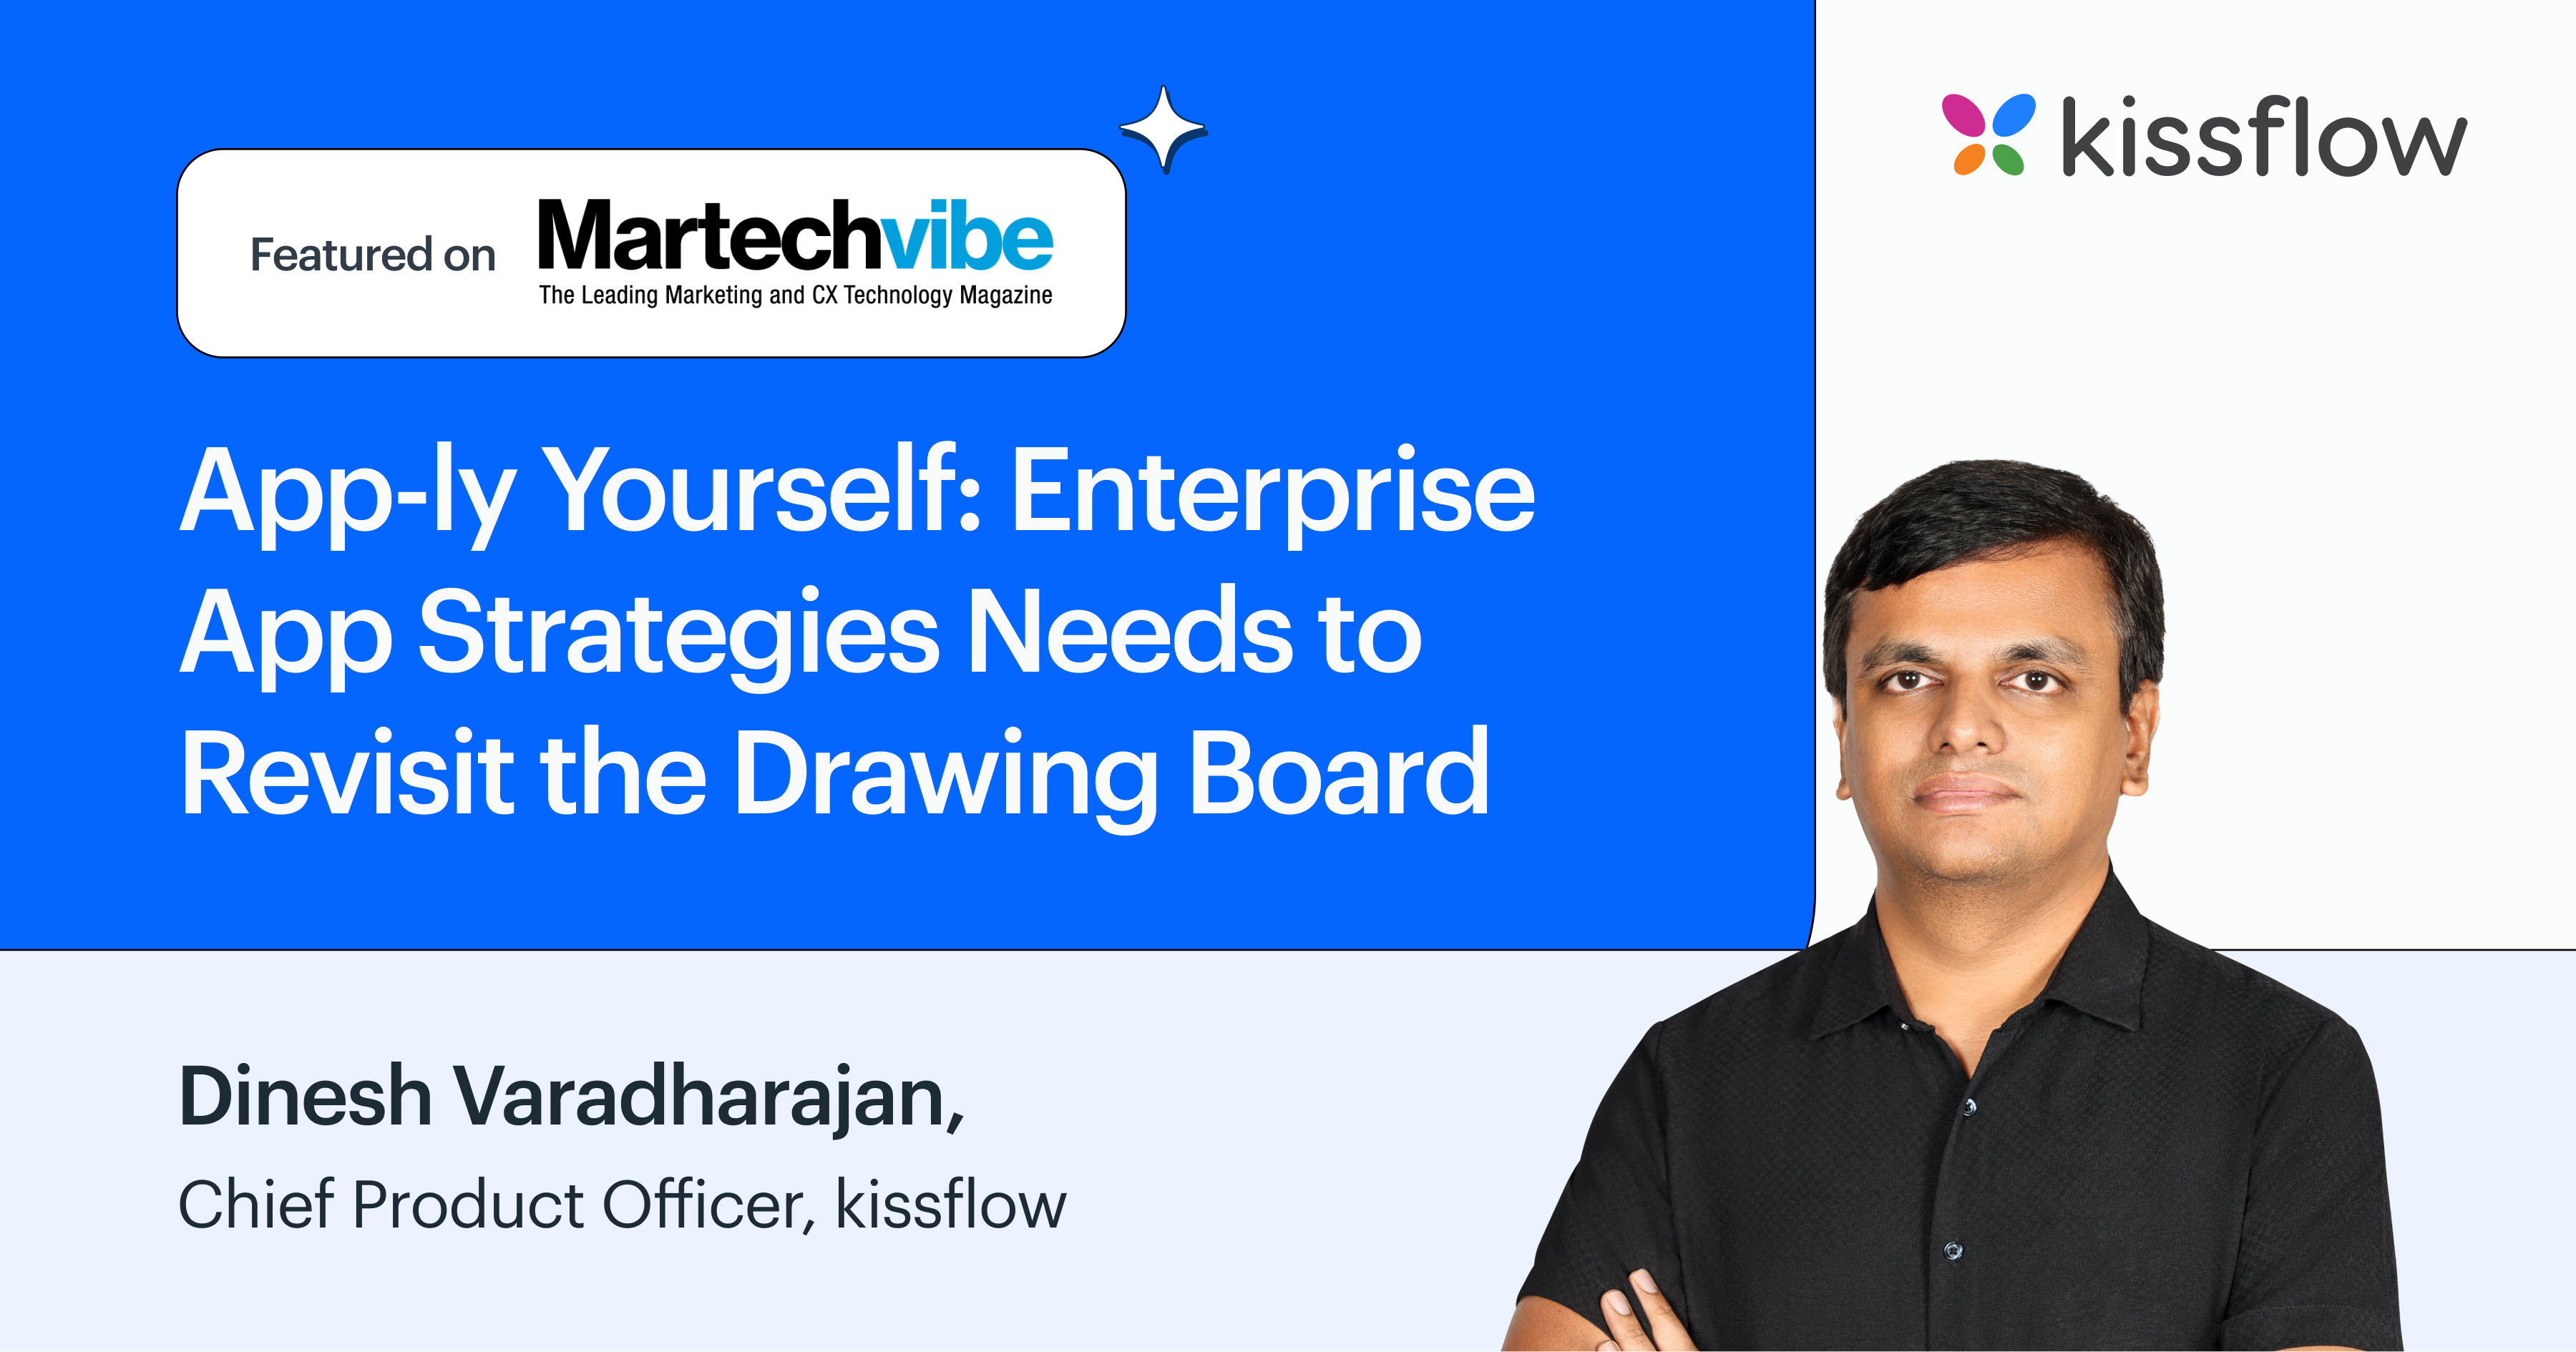 App-ly Yourself: Enterprise App Strategies Needs to Revisit the Drawing Board